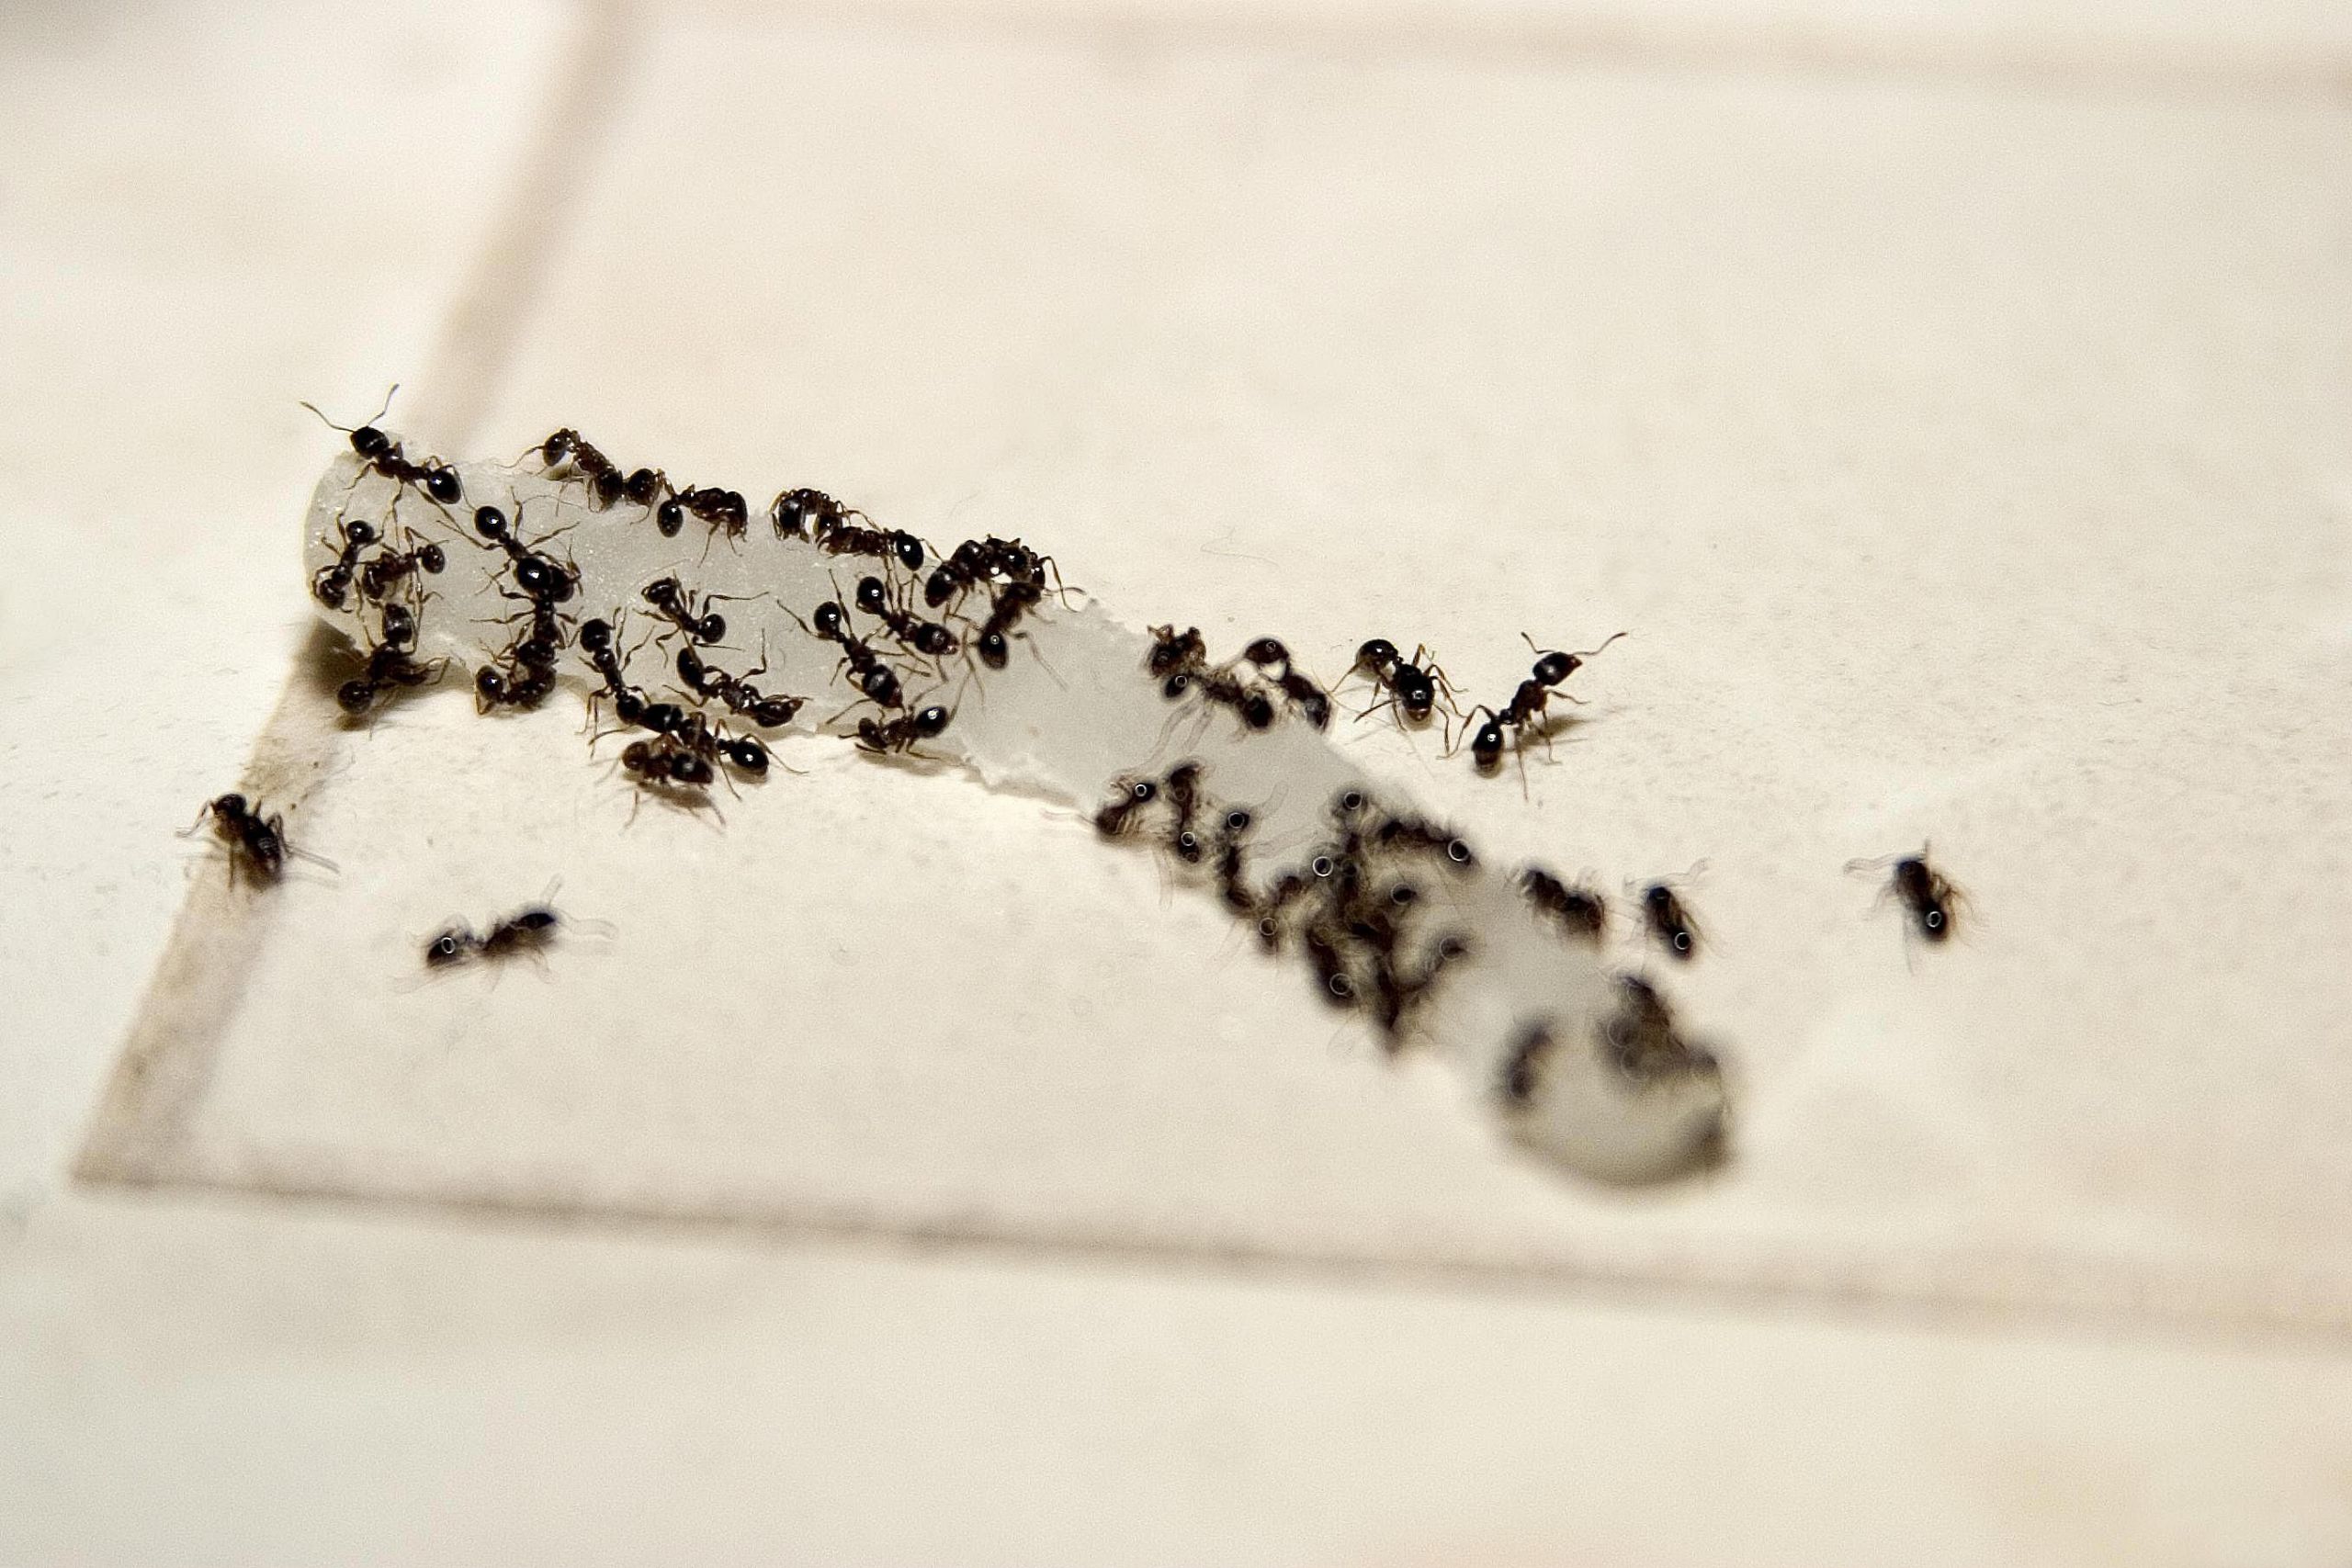 Small Ants In Kitchen New How To Get Rid Of Stinky Odorous House Ants Of Small Ants In Kitchen Scaled 